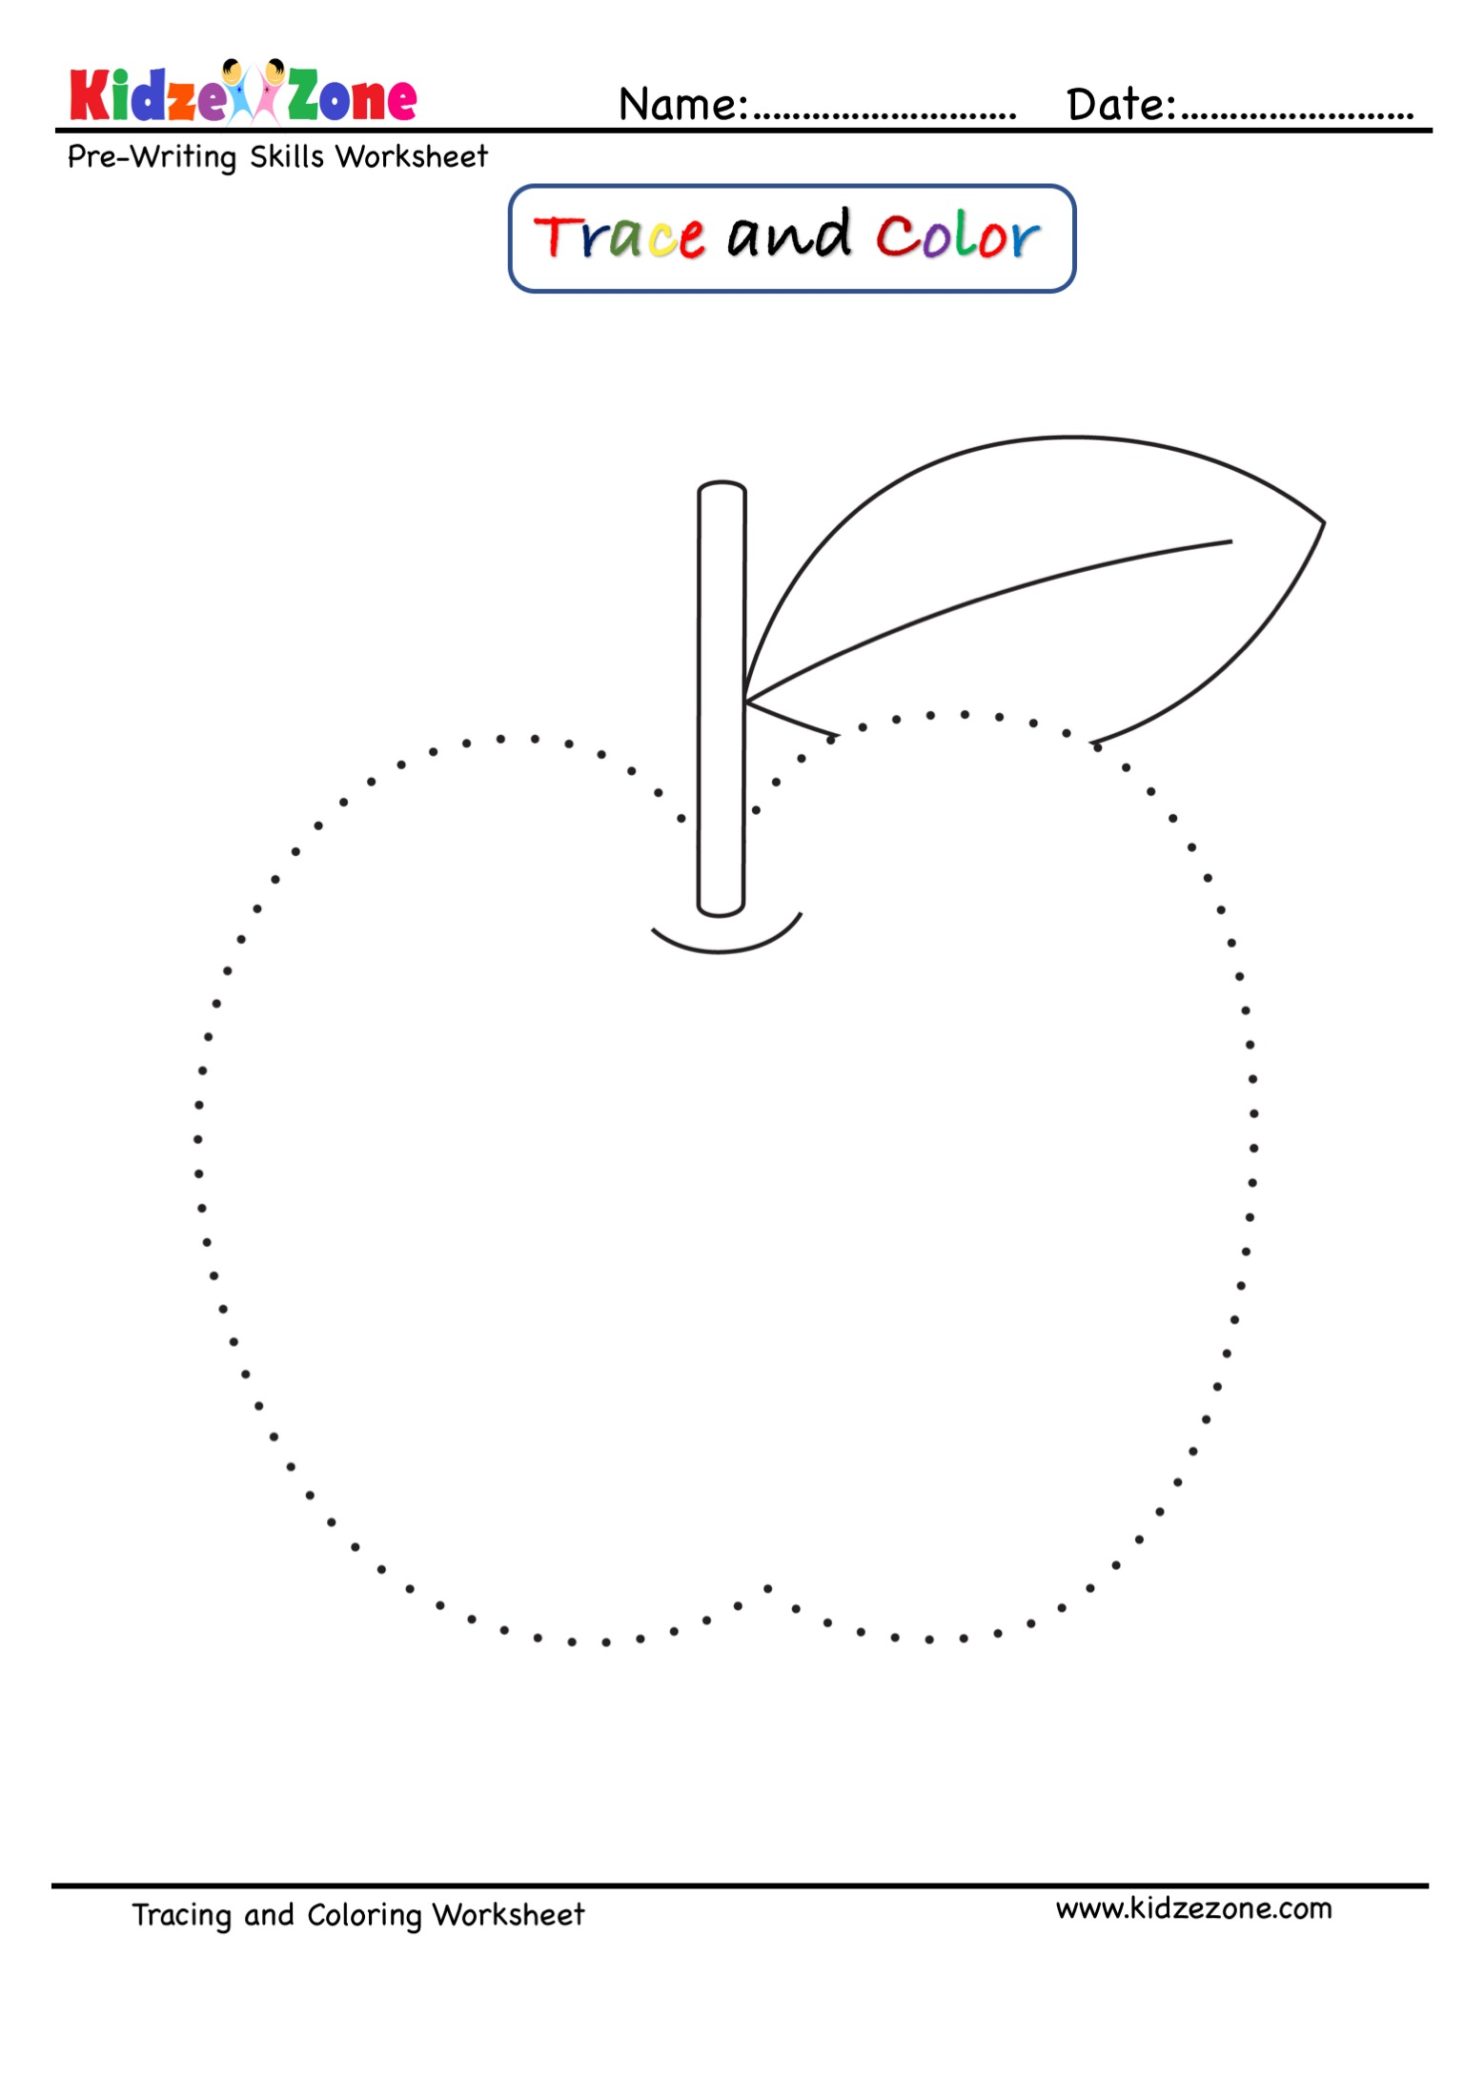 apple-tracing-and-coloring-worksheet-kidzezone